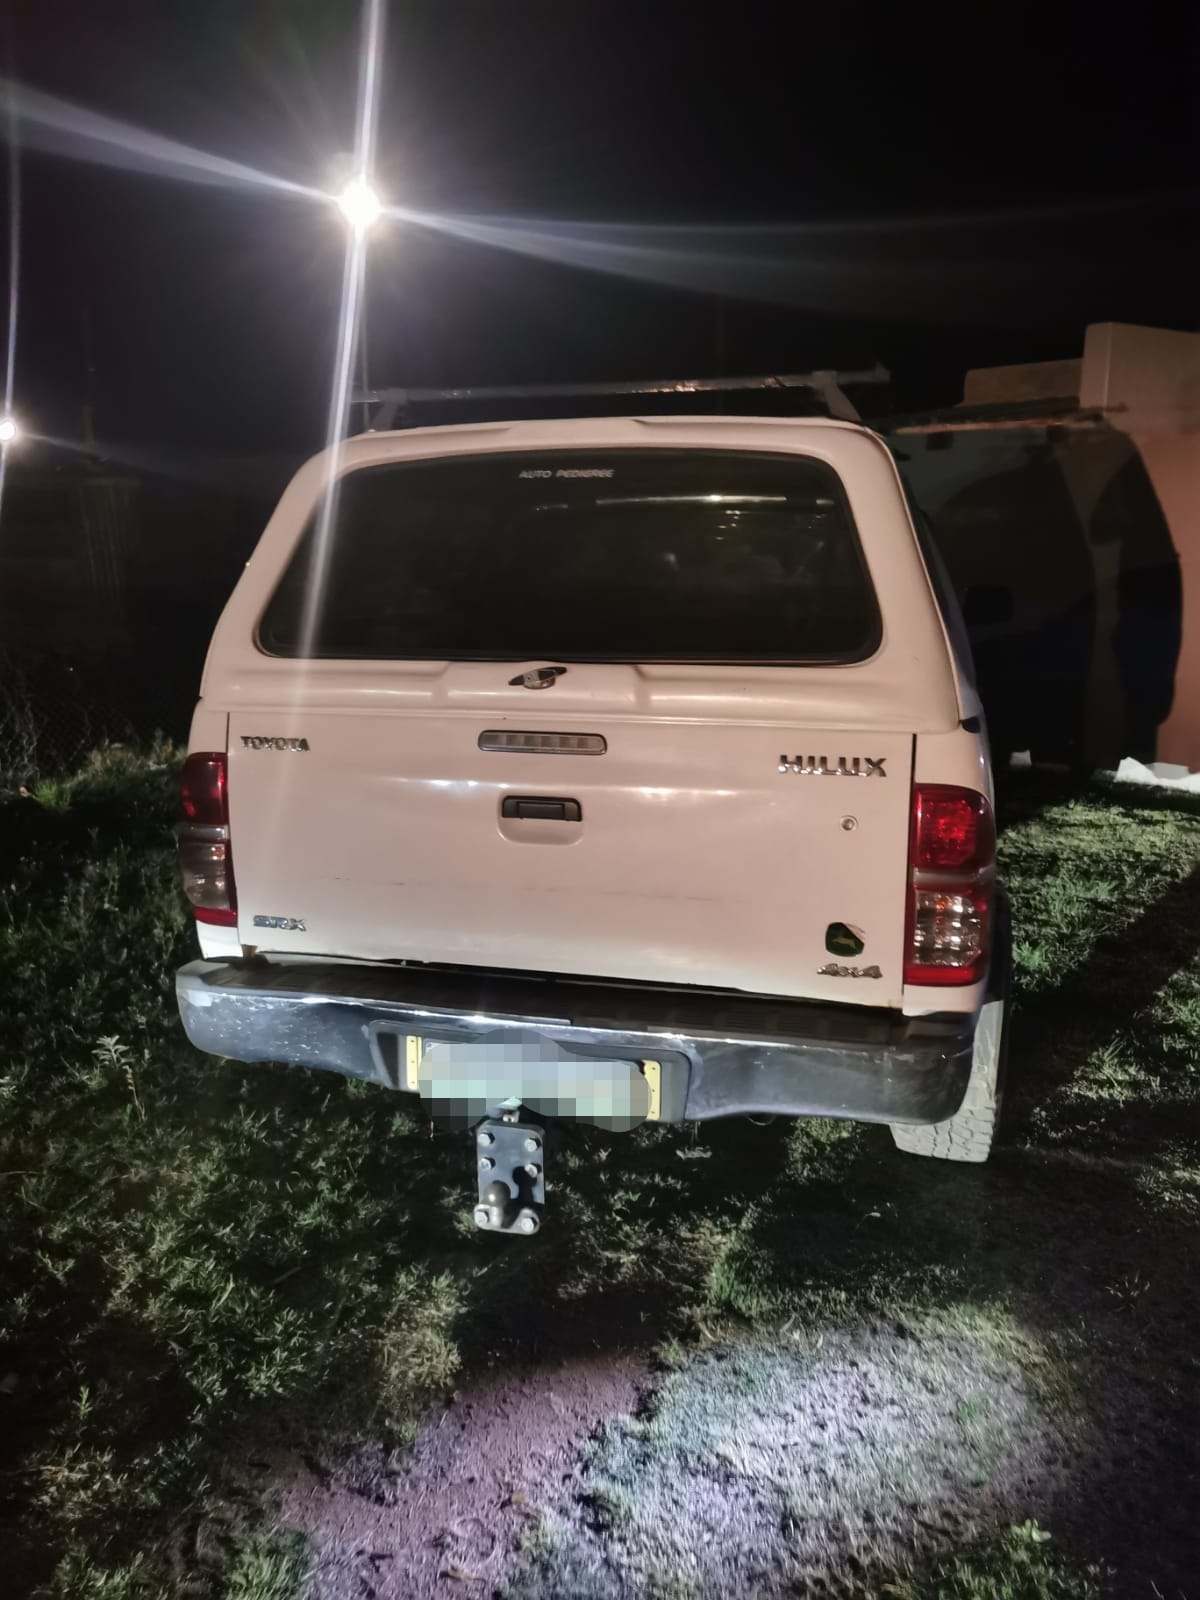 Stolen vehicle recovered in the Rodenbeck area